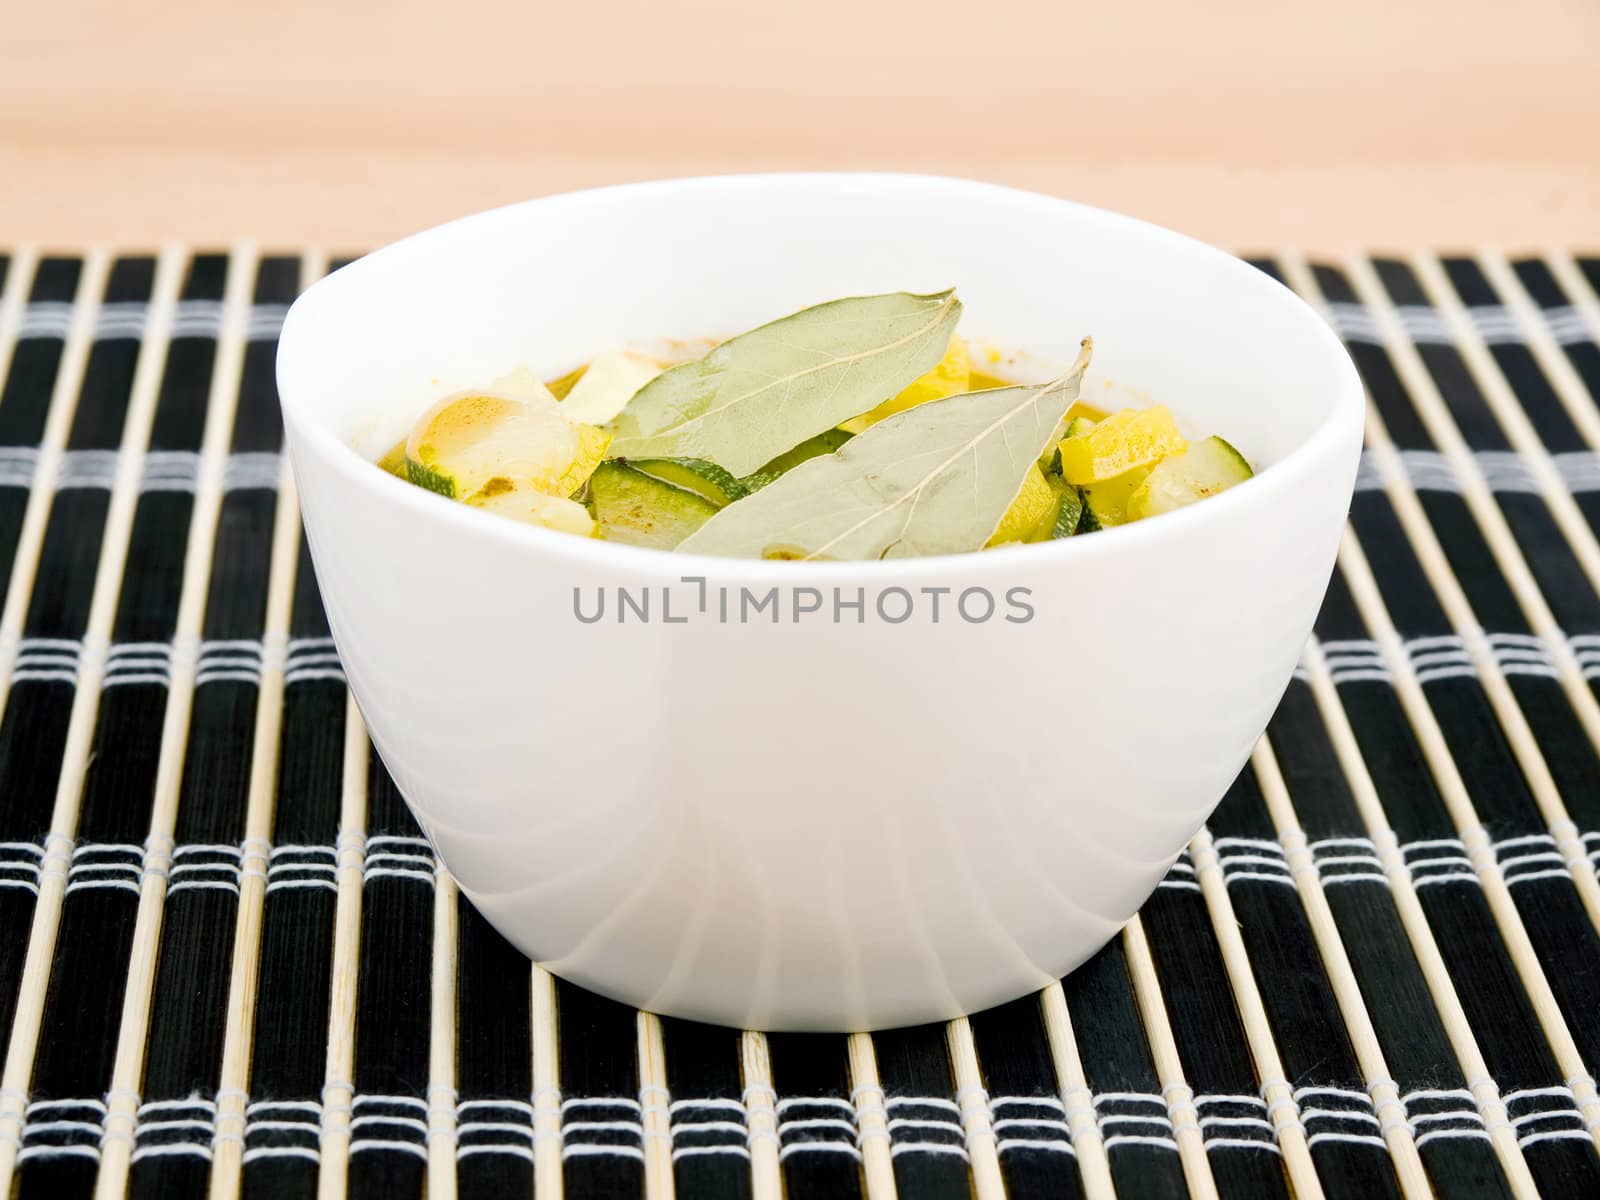 Delicious vegetarian soup made from zucchini and yellow paprika served in white porcelain bowl on black bamboo mat